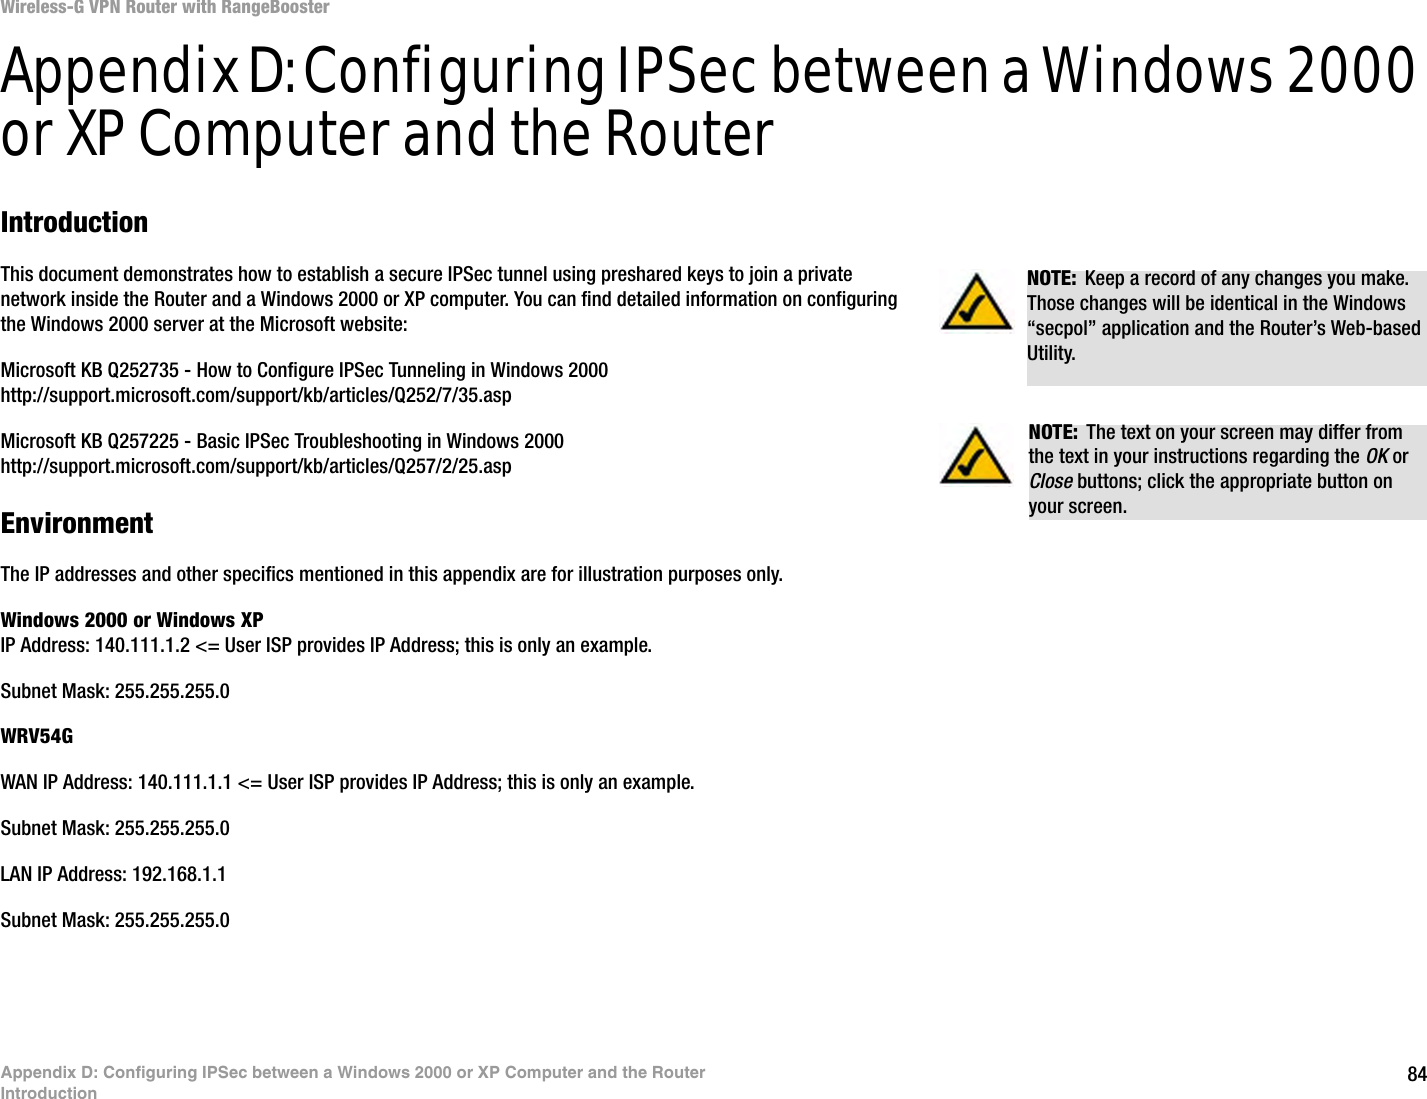 84Appendix D: Configuring IPSec between a Windows 2000 or XP Computer and the RouterIntroductionWireless-G VPN Router with RangeBoosterAppendix D: Configuring IPSec between a Windows 2000 or XP Computer and the RouterIntroductionThis document demonstrates how to establish a secure IPSec tunnel using preshared keys to join a private network inside the Router and a Windows 2000 or XP computer. You can find detailed information on configuring the Windows 2000 server at the Microsoft website: Microsoft KB Q252735 - How to Configure IPSec Tunneling in Windows 2000http://support.microsoft.com/support/kb/articles/Q252/7/35.aspMicrosoft KB Q257225 - Basic IPSec Troubleshooting in Windows 2000http://support.microsoft.com/support/kb/articles/Q257/2/25.aspEnvironmentThe IP addresses and other specifics mentioned in this appendix are for illustration purposes only.Windows 2000 or Windows XPIP Address: 140.111.1.2 &lt;= User ISP provides IP Address; this is only an example.Subnet Mask: 255.255.255.0WRV54GWAN IP Address: 140.111.1.1 &lt;= User ISP provides IP Address; this is only an example.Subnet Mask: 255.255.255.0LAN IP Address: 192.168.1.1Subnet Mask: 255.255.255.0NOTE: Keep a record of any changes you make. Those changes will be identical in the Windows “secpol” application and the Router’s Web-based Utility.NOTE: The text on your screen may differ from the text in your instructions regarding the OK or Close buttons; click the appropriate button on your screen.